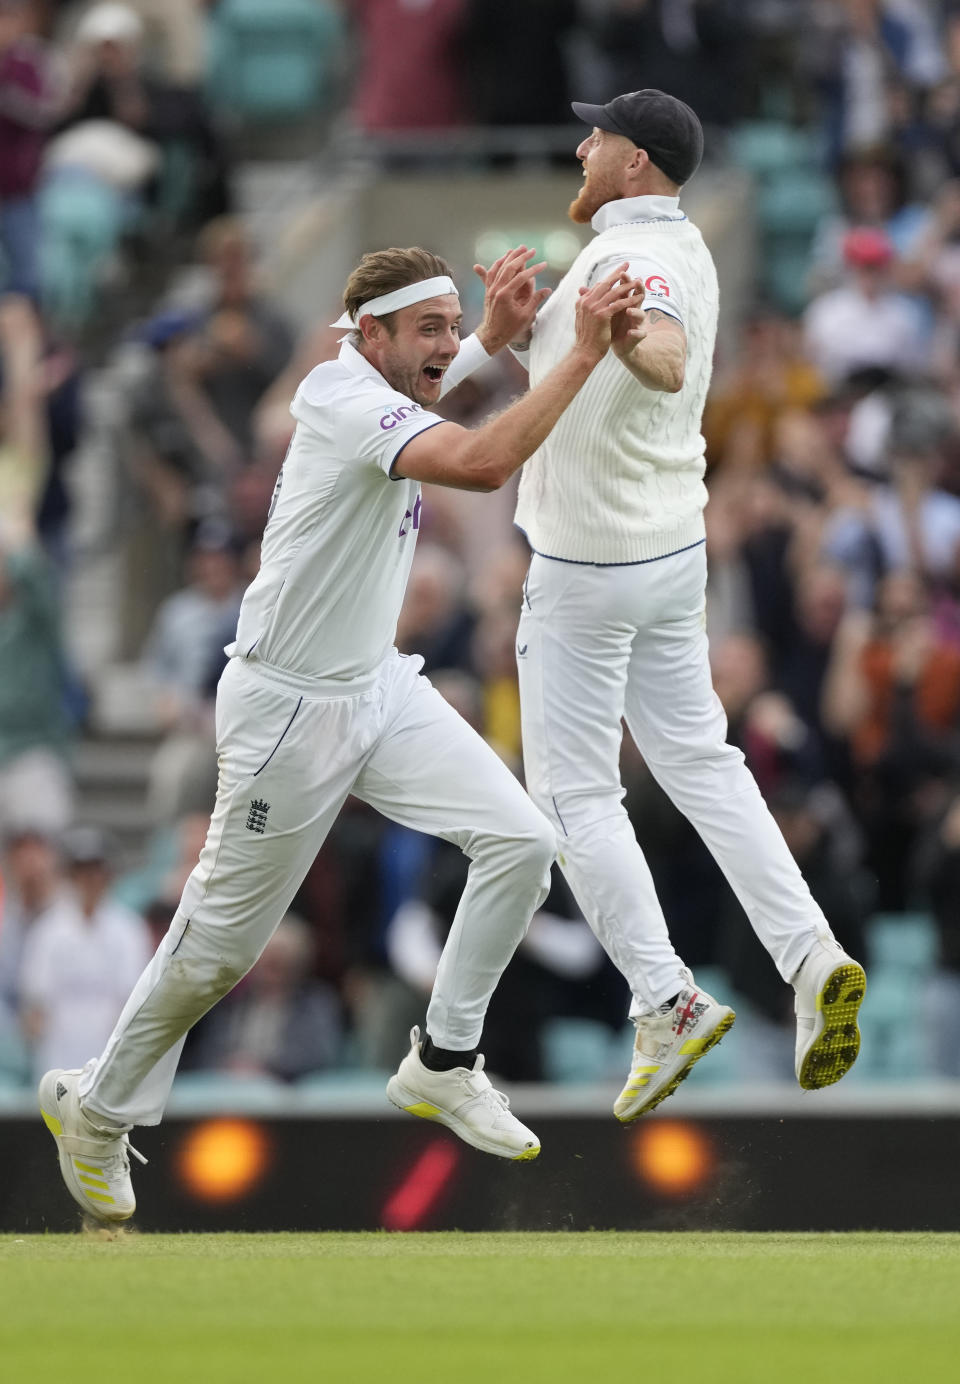 England's Stuart Broad and England's Ben Stokes celebrate the dismissal of Australia's Todd Murphy on day five of the fifth Ashes Test match between England and Australia, at The Oval cricket ground in London, Monday, July 31, 2023. (AP Photo/Kirsty Wigglesworth)